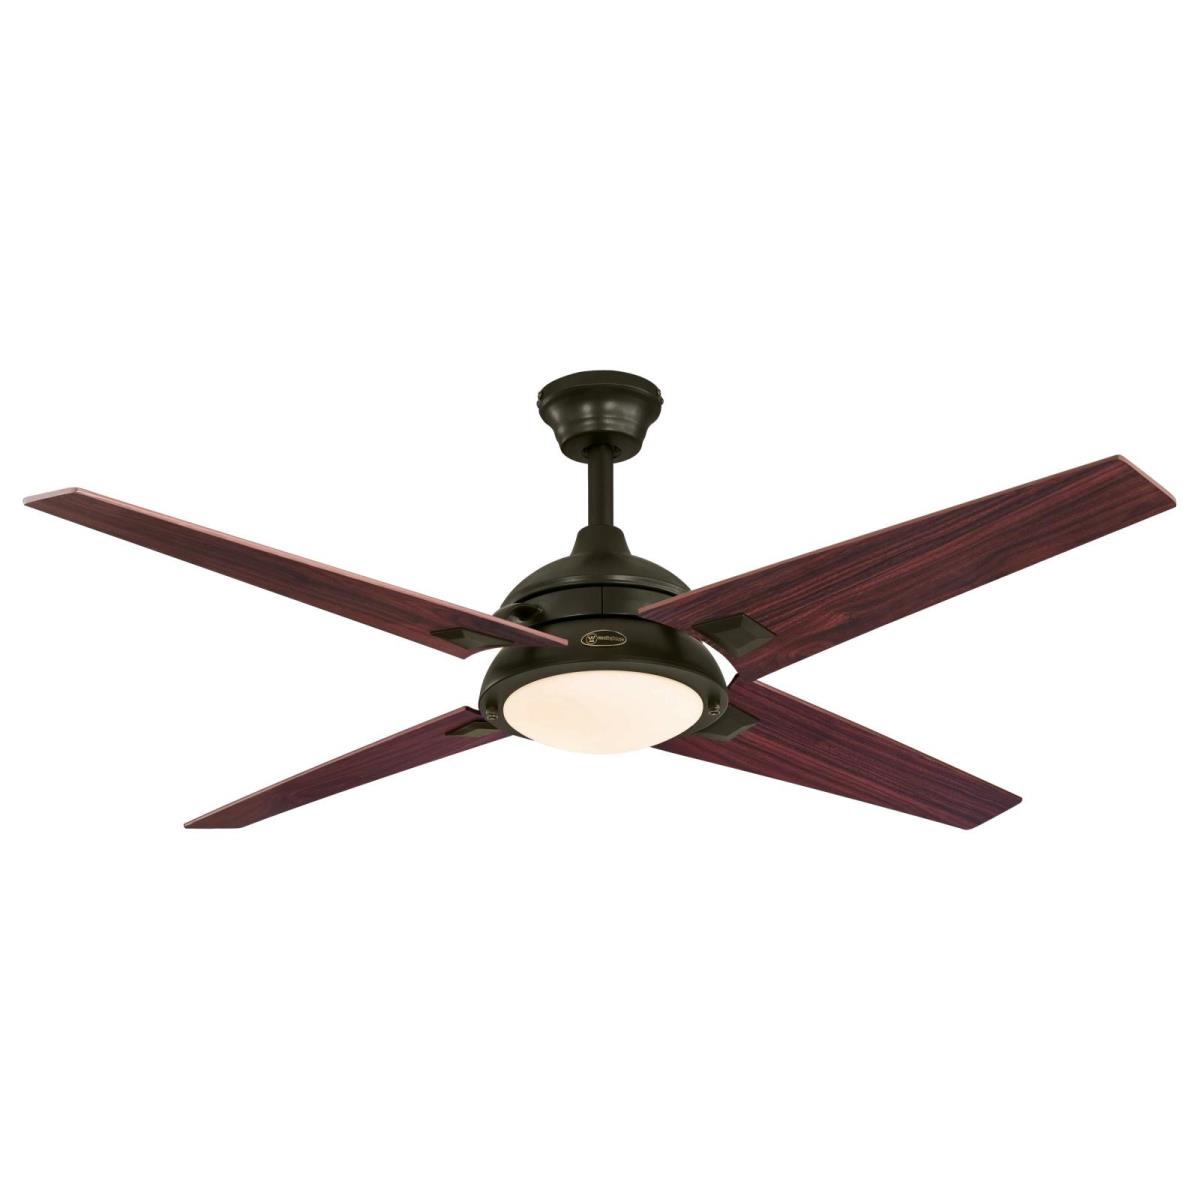 52" Oil Rubbed Bronze Finish Reversible Blades (Mahogany/Cherry) Includes Light Kit with Opal Frosted Glass